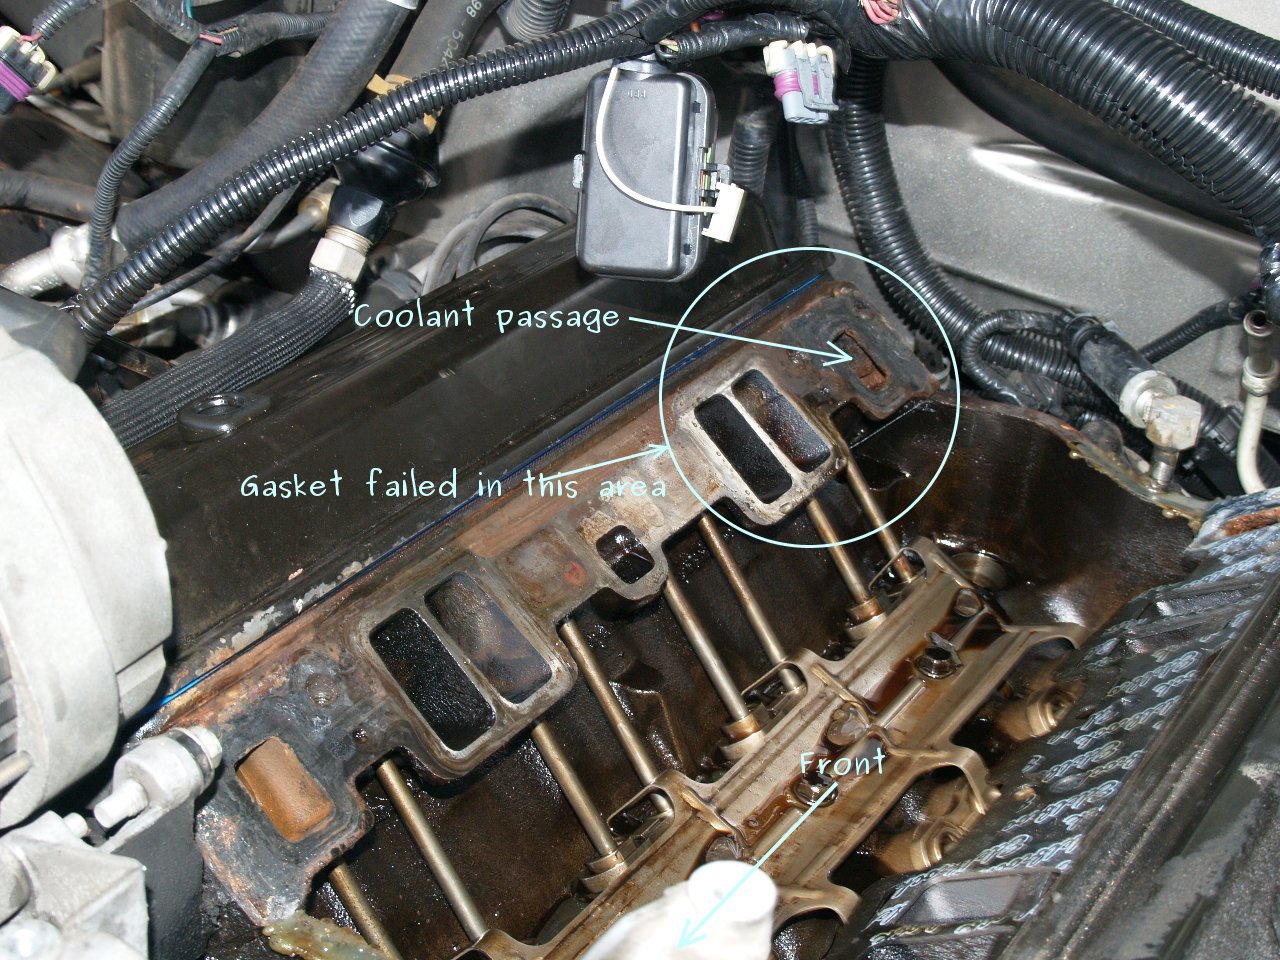 See P025A in engine